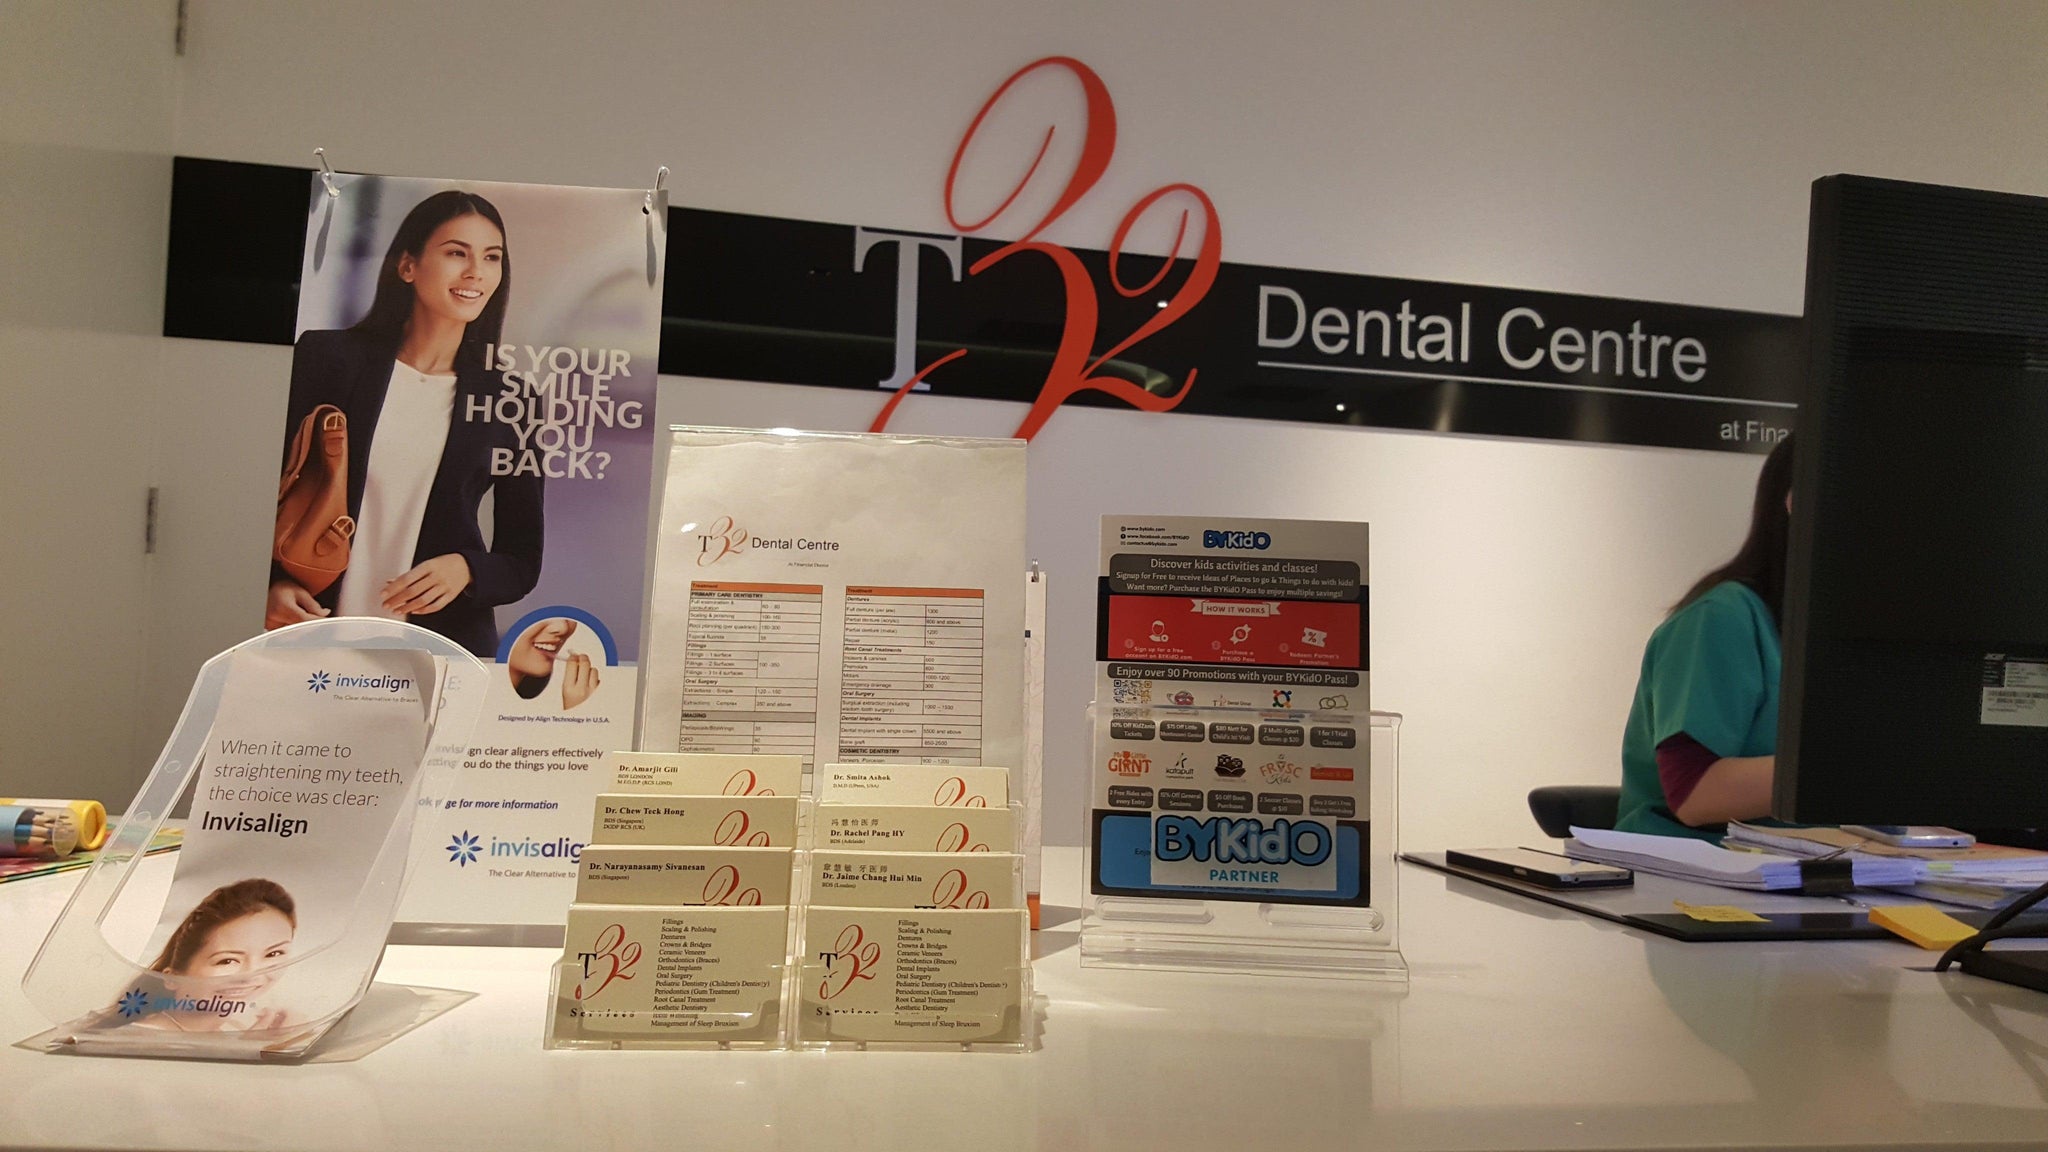 Bring Your Kid Out to T32 Dental Centre: Post ActivityReview